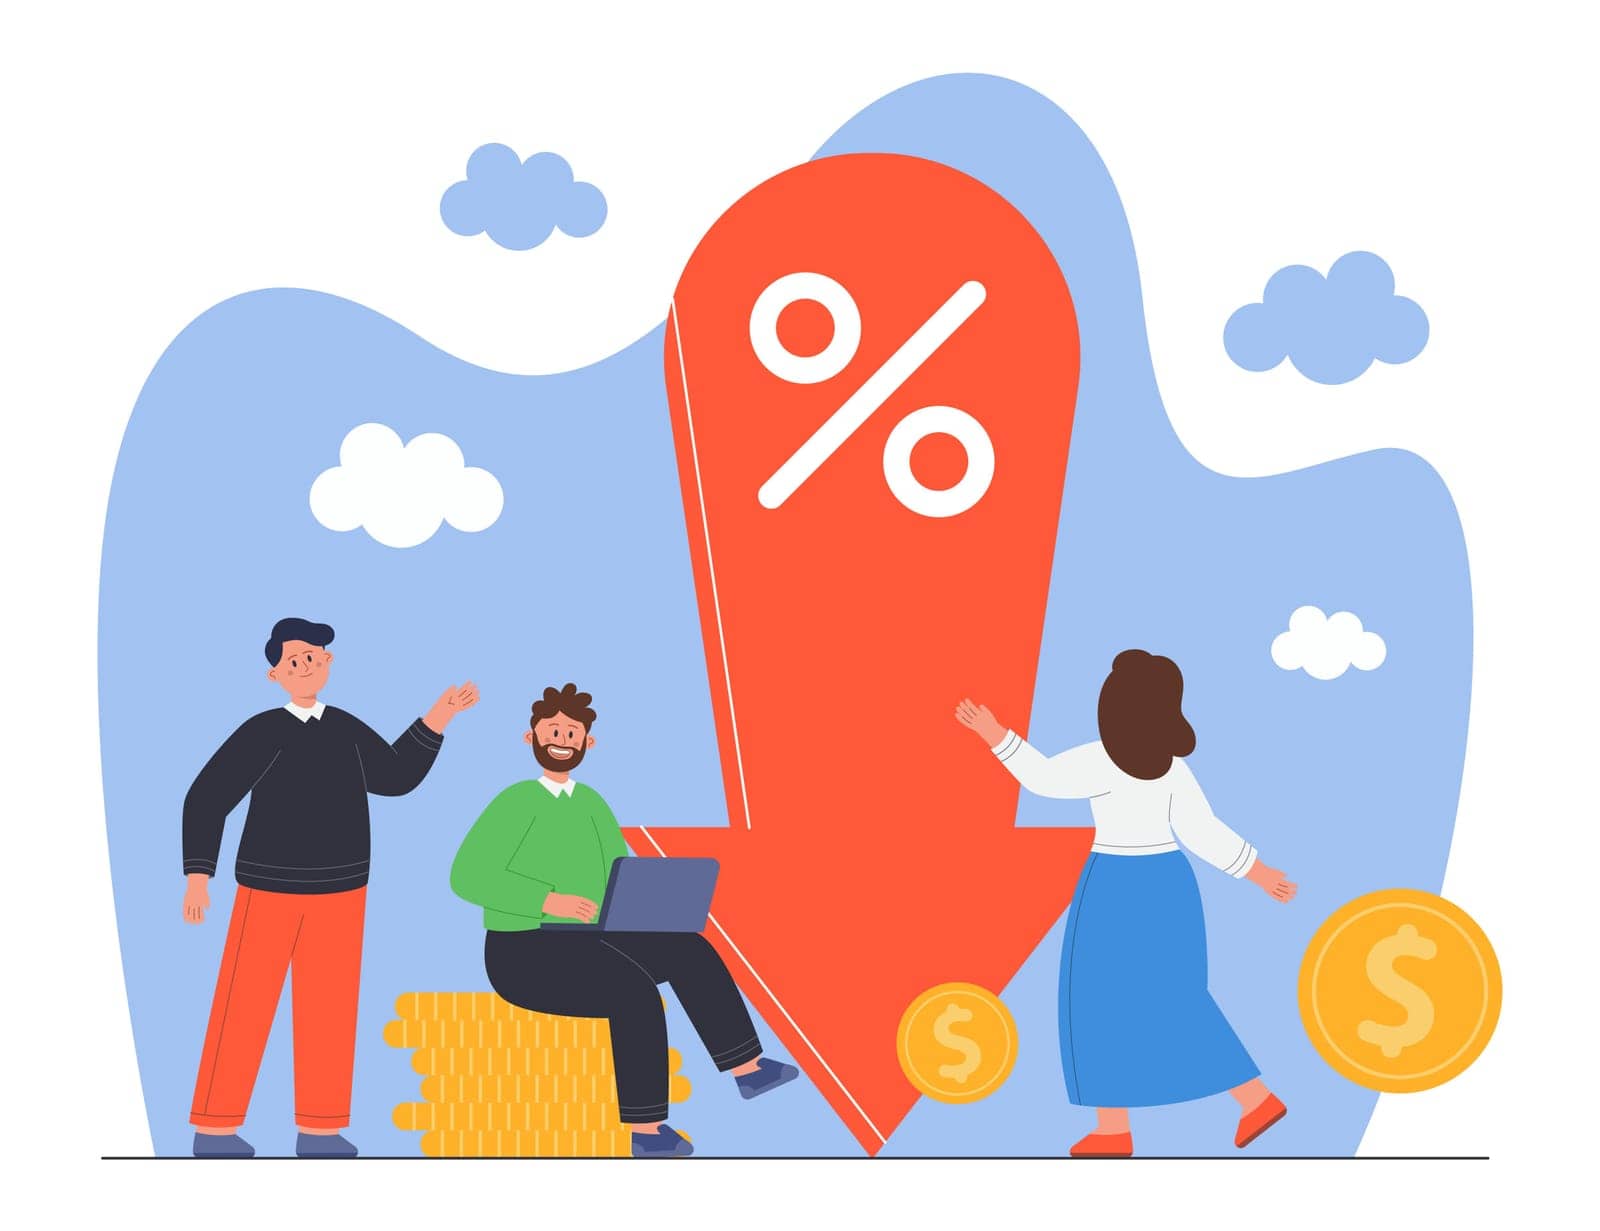 Tiny male and female characters standing near arrow down showing percentage decrease. Financial reduction flat vector illustration. Low rate, special offer, loan, discount price concept